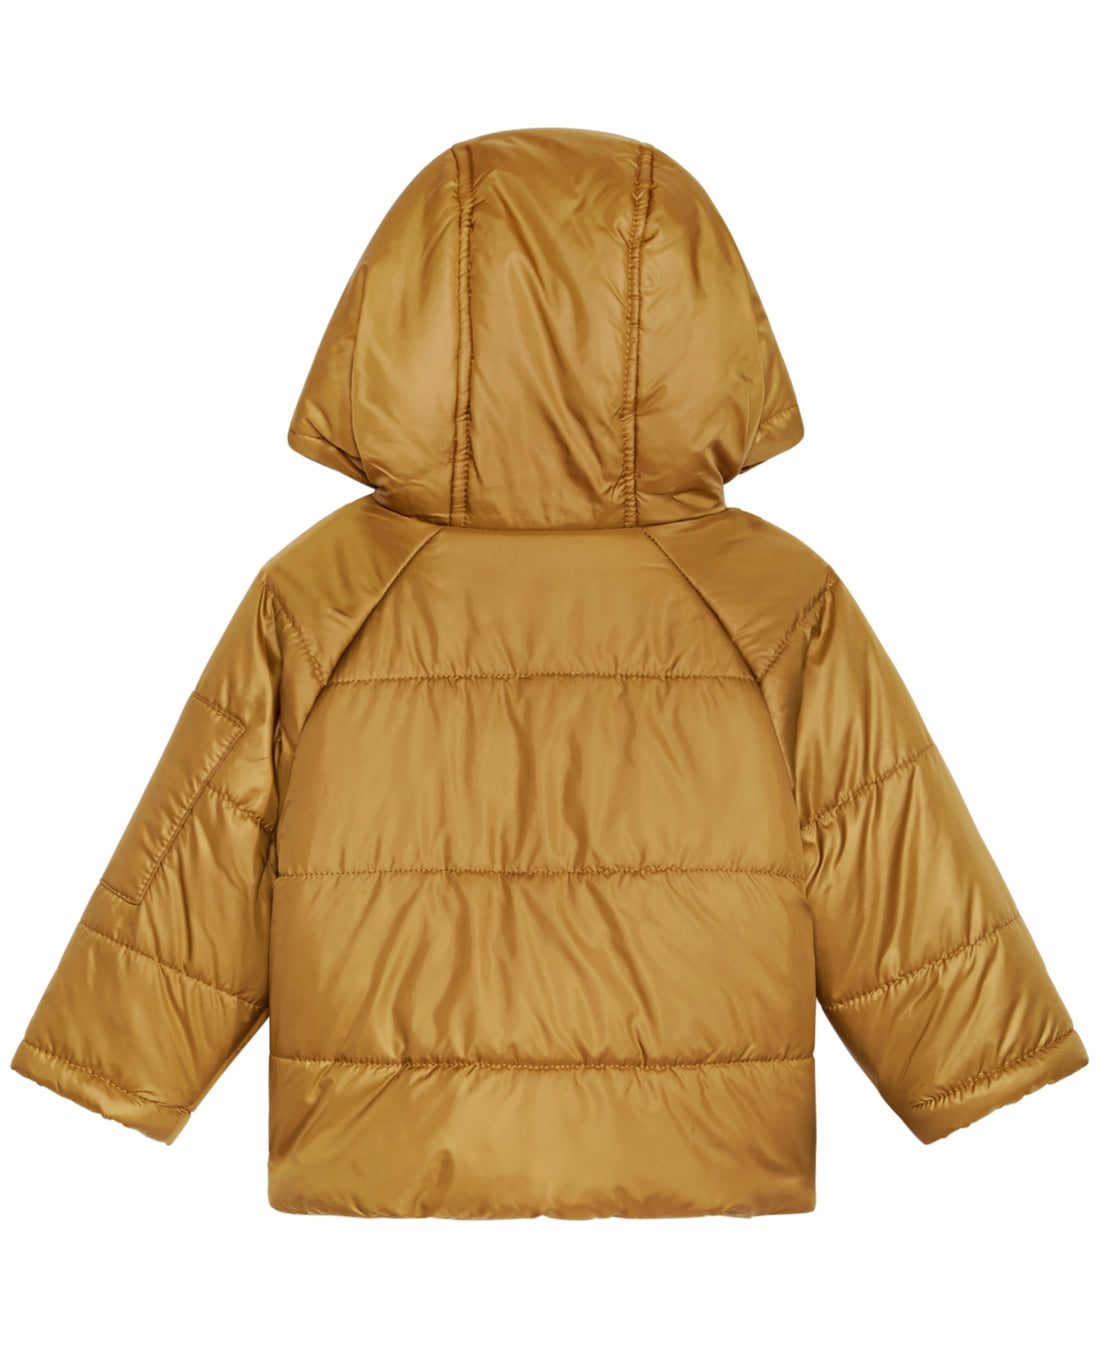 S Rothschild & Co Infant Boys Solid Bubble Hooded Jacket